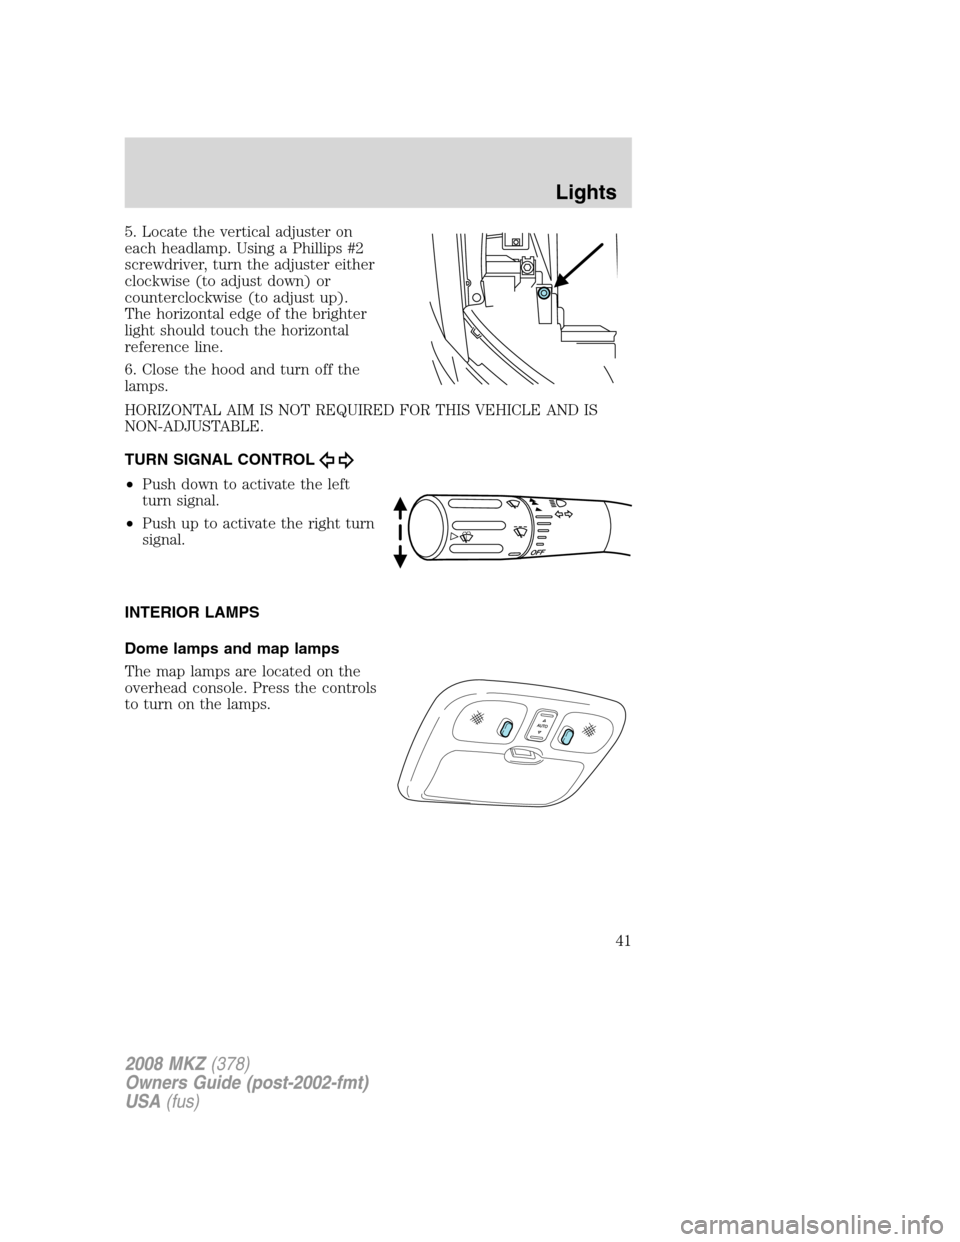 LINCOLN MKZ 2008  Owners Manual 5. Locate the vertical adjuster on
each headlamp. Using a Phillips #2
screwdriver, turn the adjuster either
clockwise (to adjust down) or
counterclockwise (to adjust up).
The horizontal edge of the br